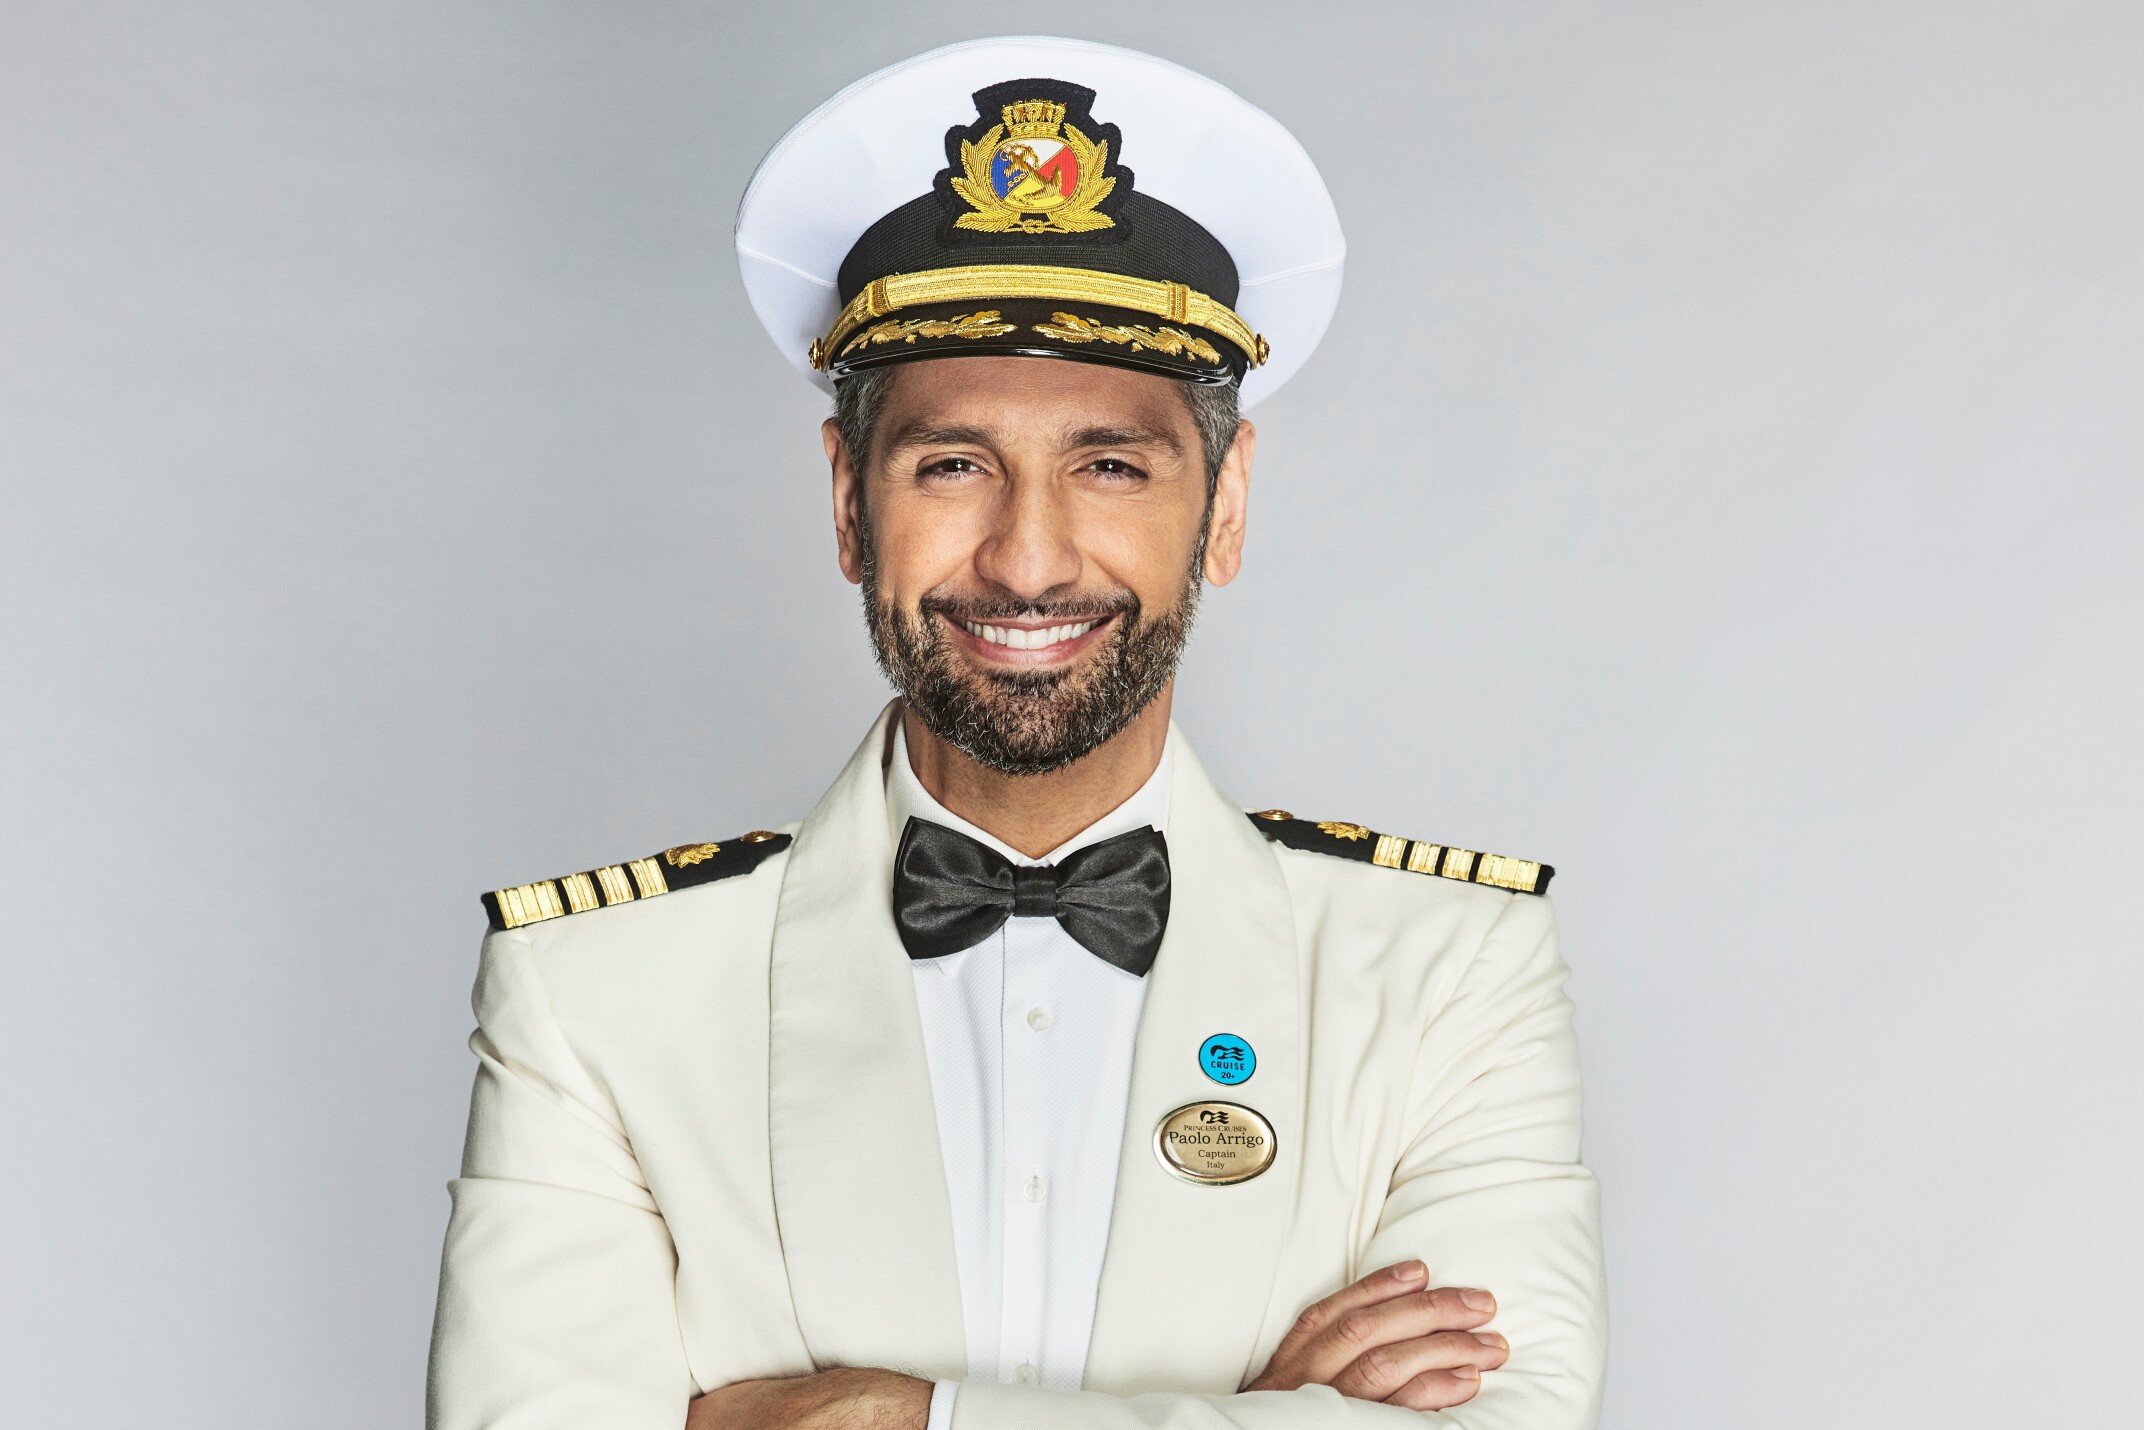 Captian Paolo Arrigo, who stars in 'The Real Love Boat' on CBS, wears his white captain uniform.